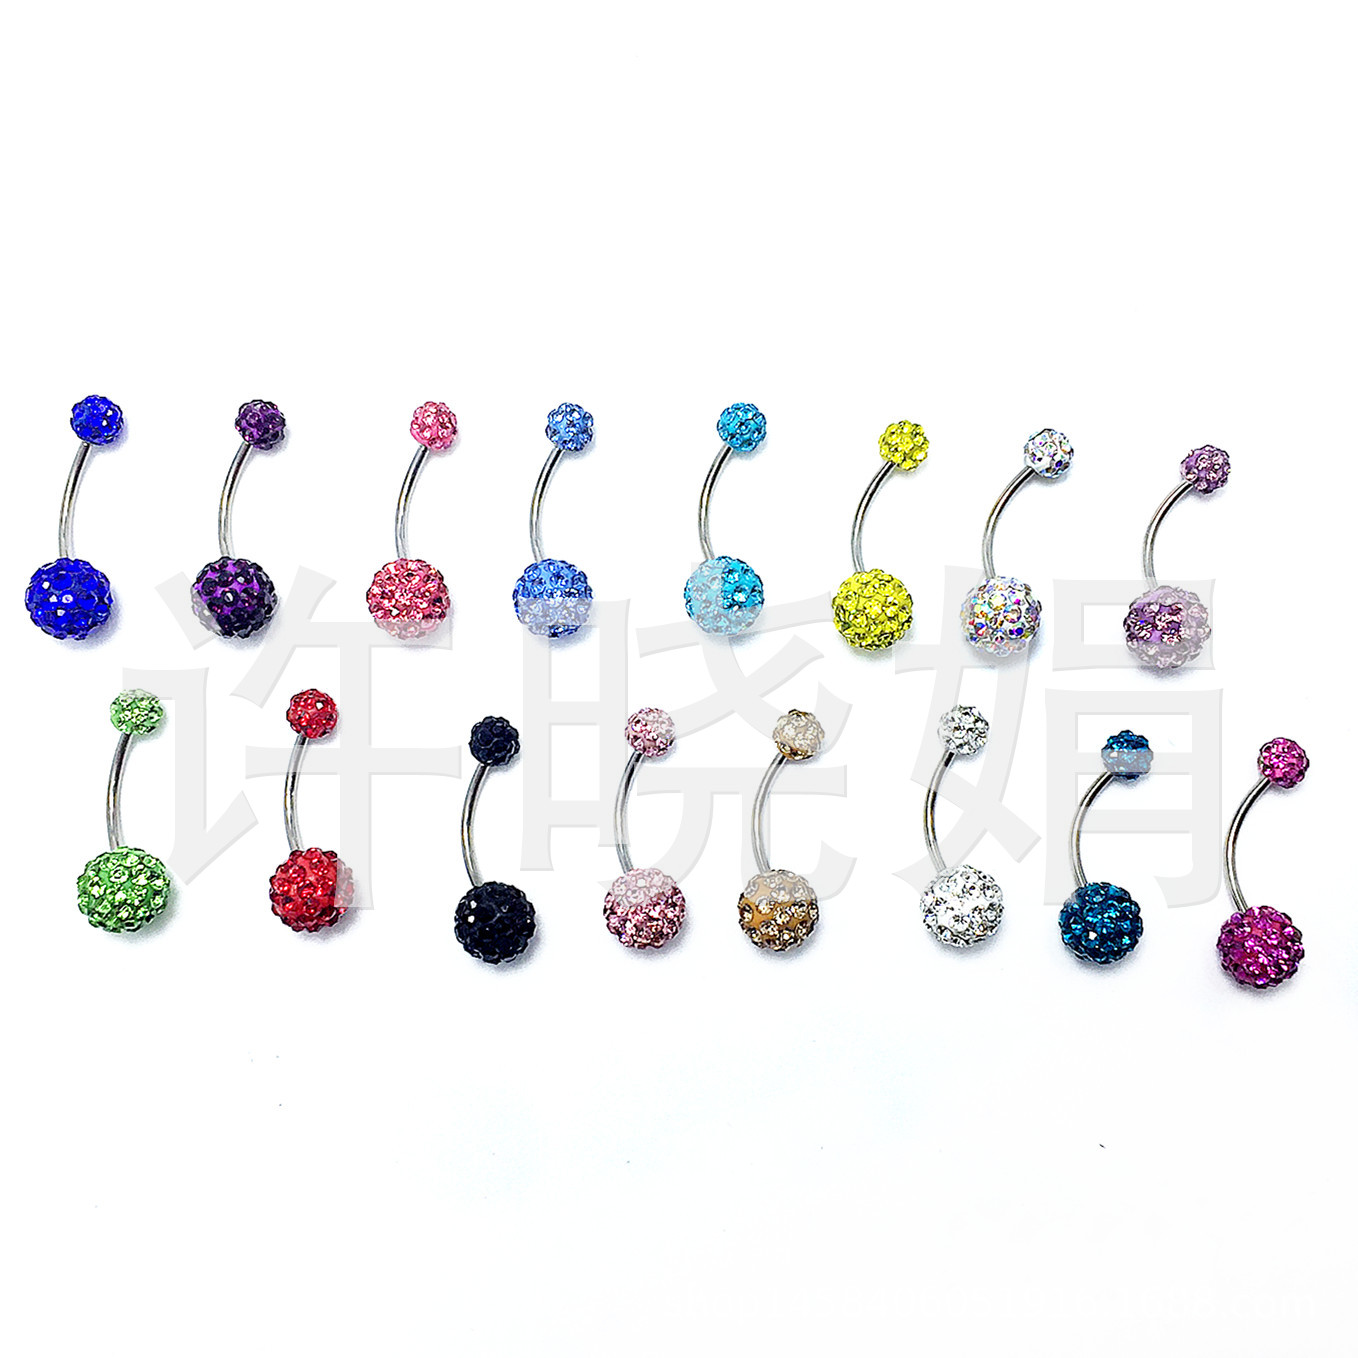 Europe and America Explosive money Jewelry wholesale Stainless steel Navel Diamond Umbilical nail AliExpress Availability Navel ring